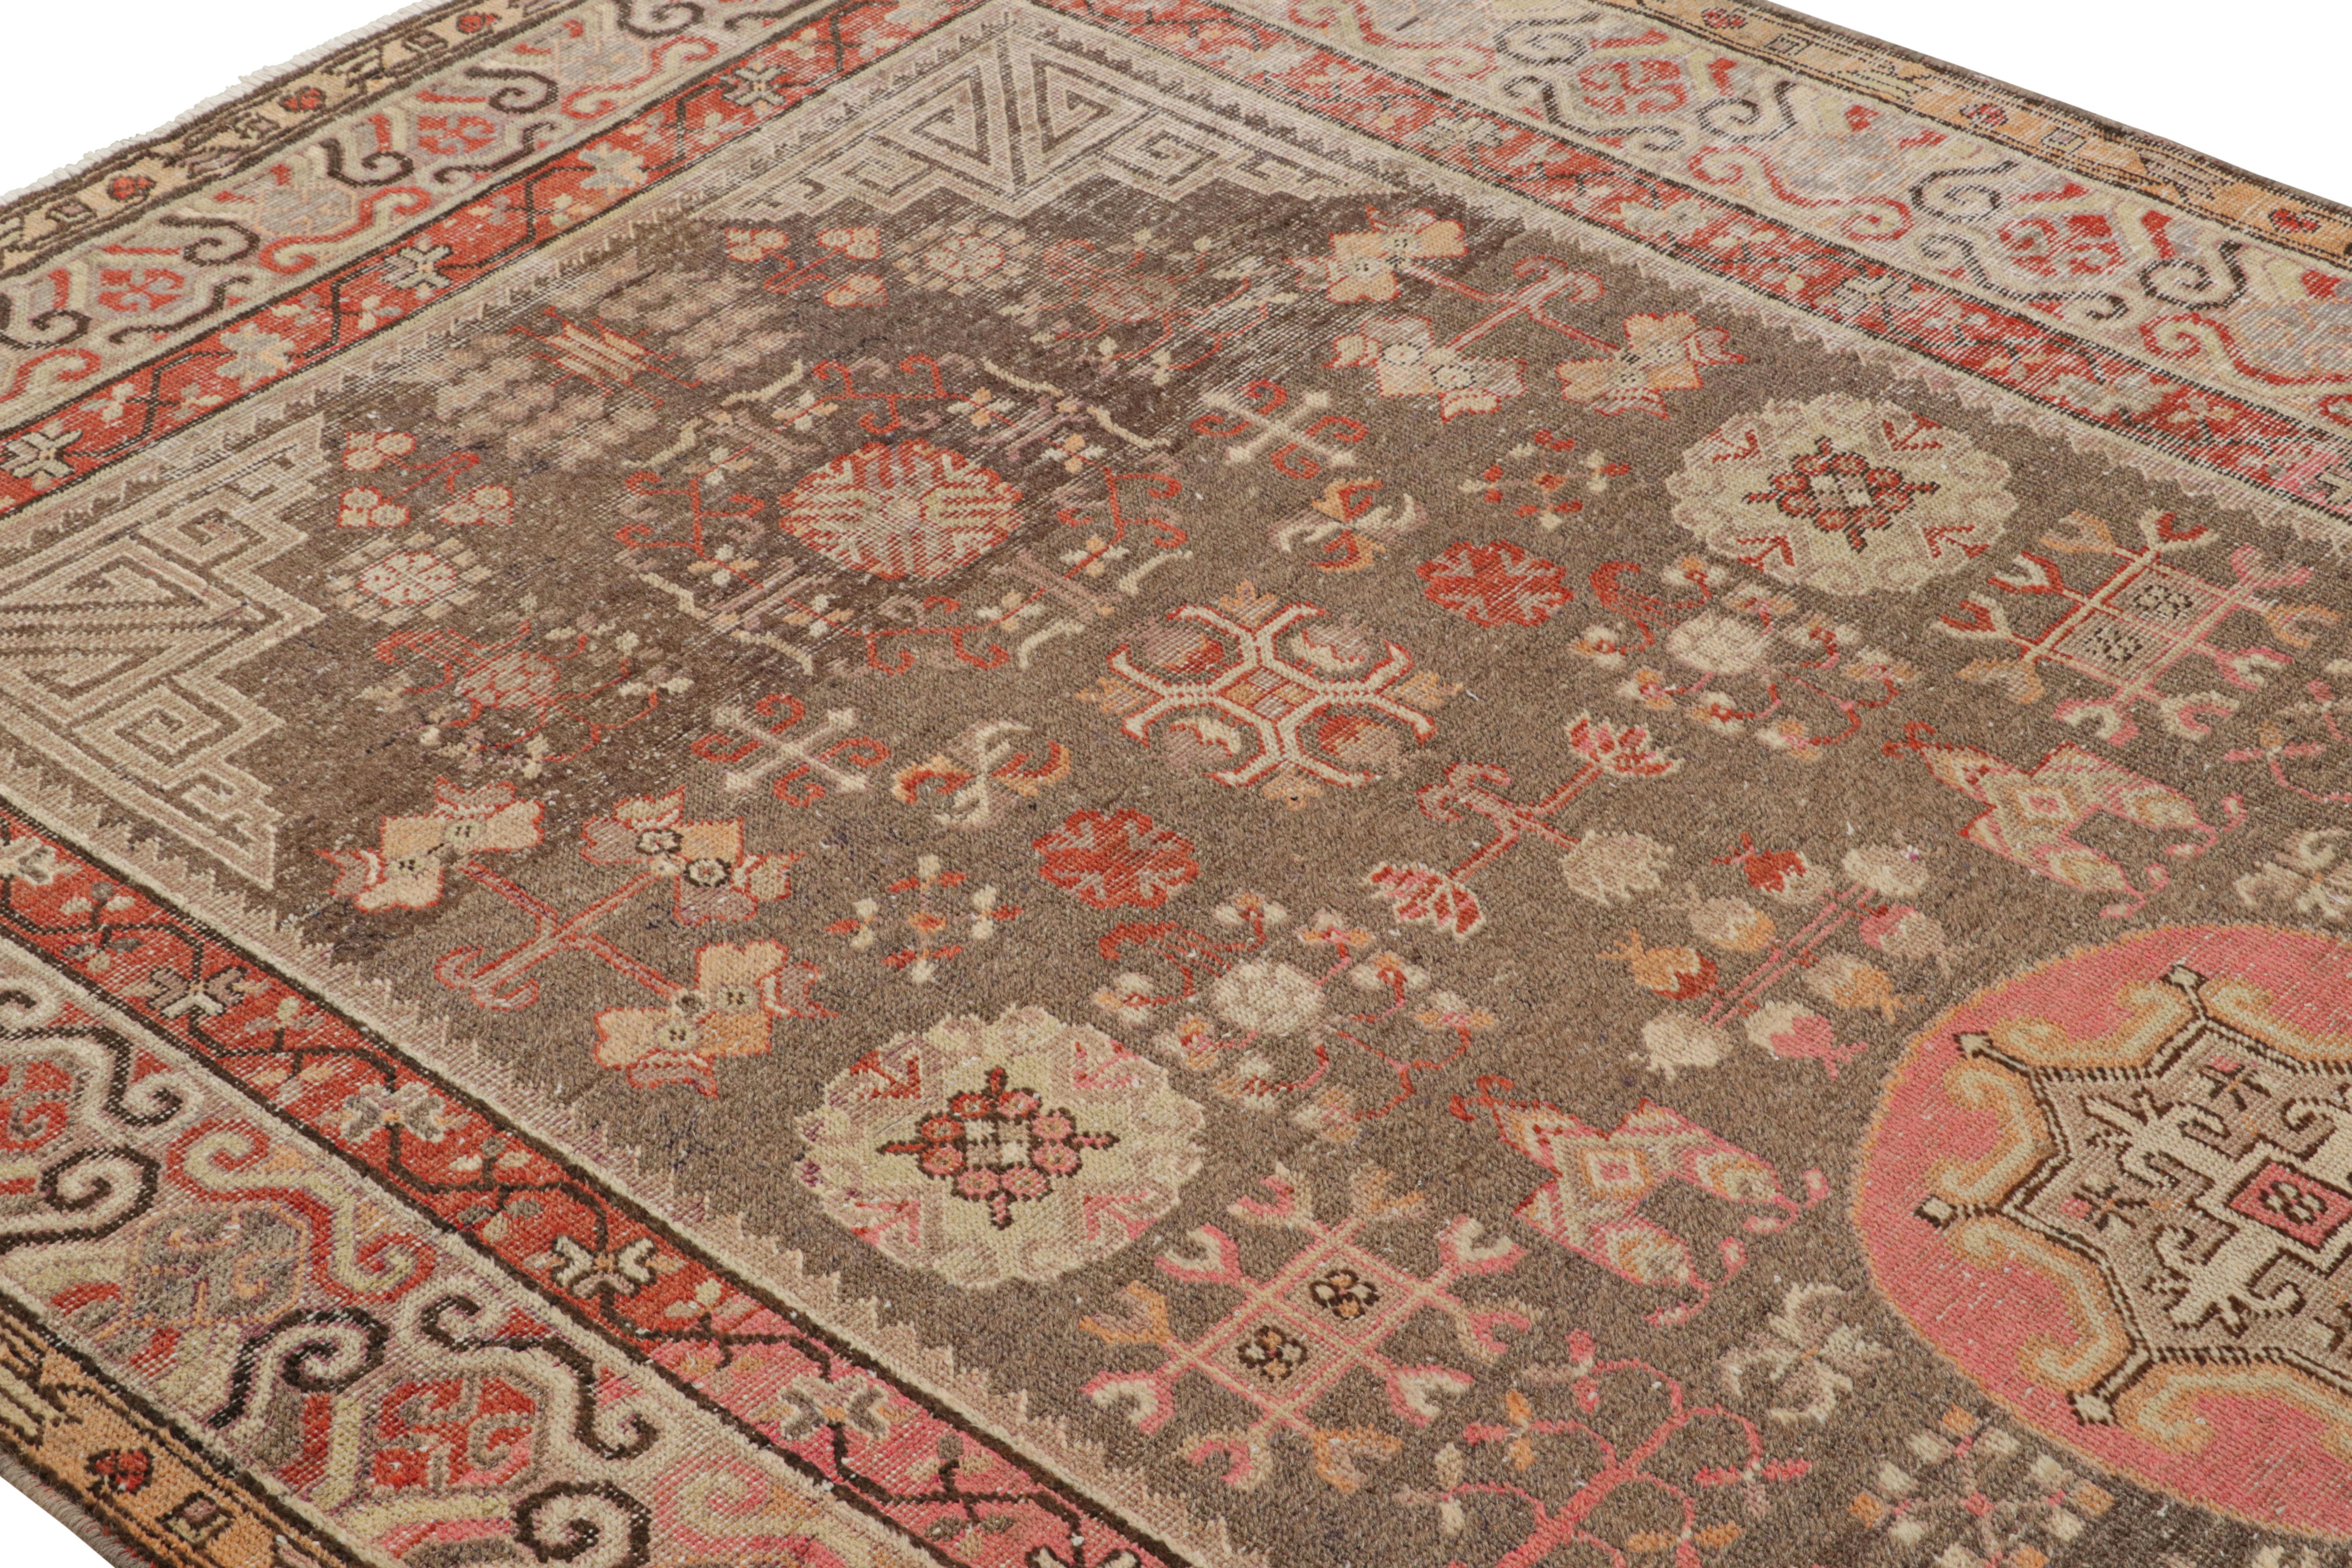 A 5 x 11 antique rug of Khotan design lineage, hand knotted in wool from East Turkestan, circa 1920-1920. Enjoying a medallion pattern in all over style with beige-brown and pink hues of lesser-known variety in this family. In good condition for its